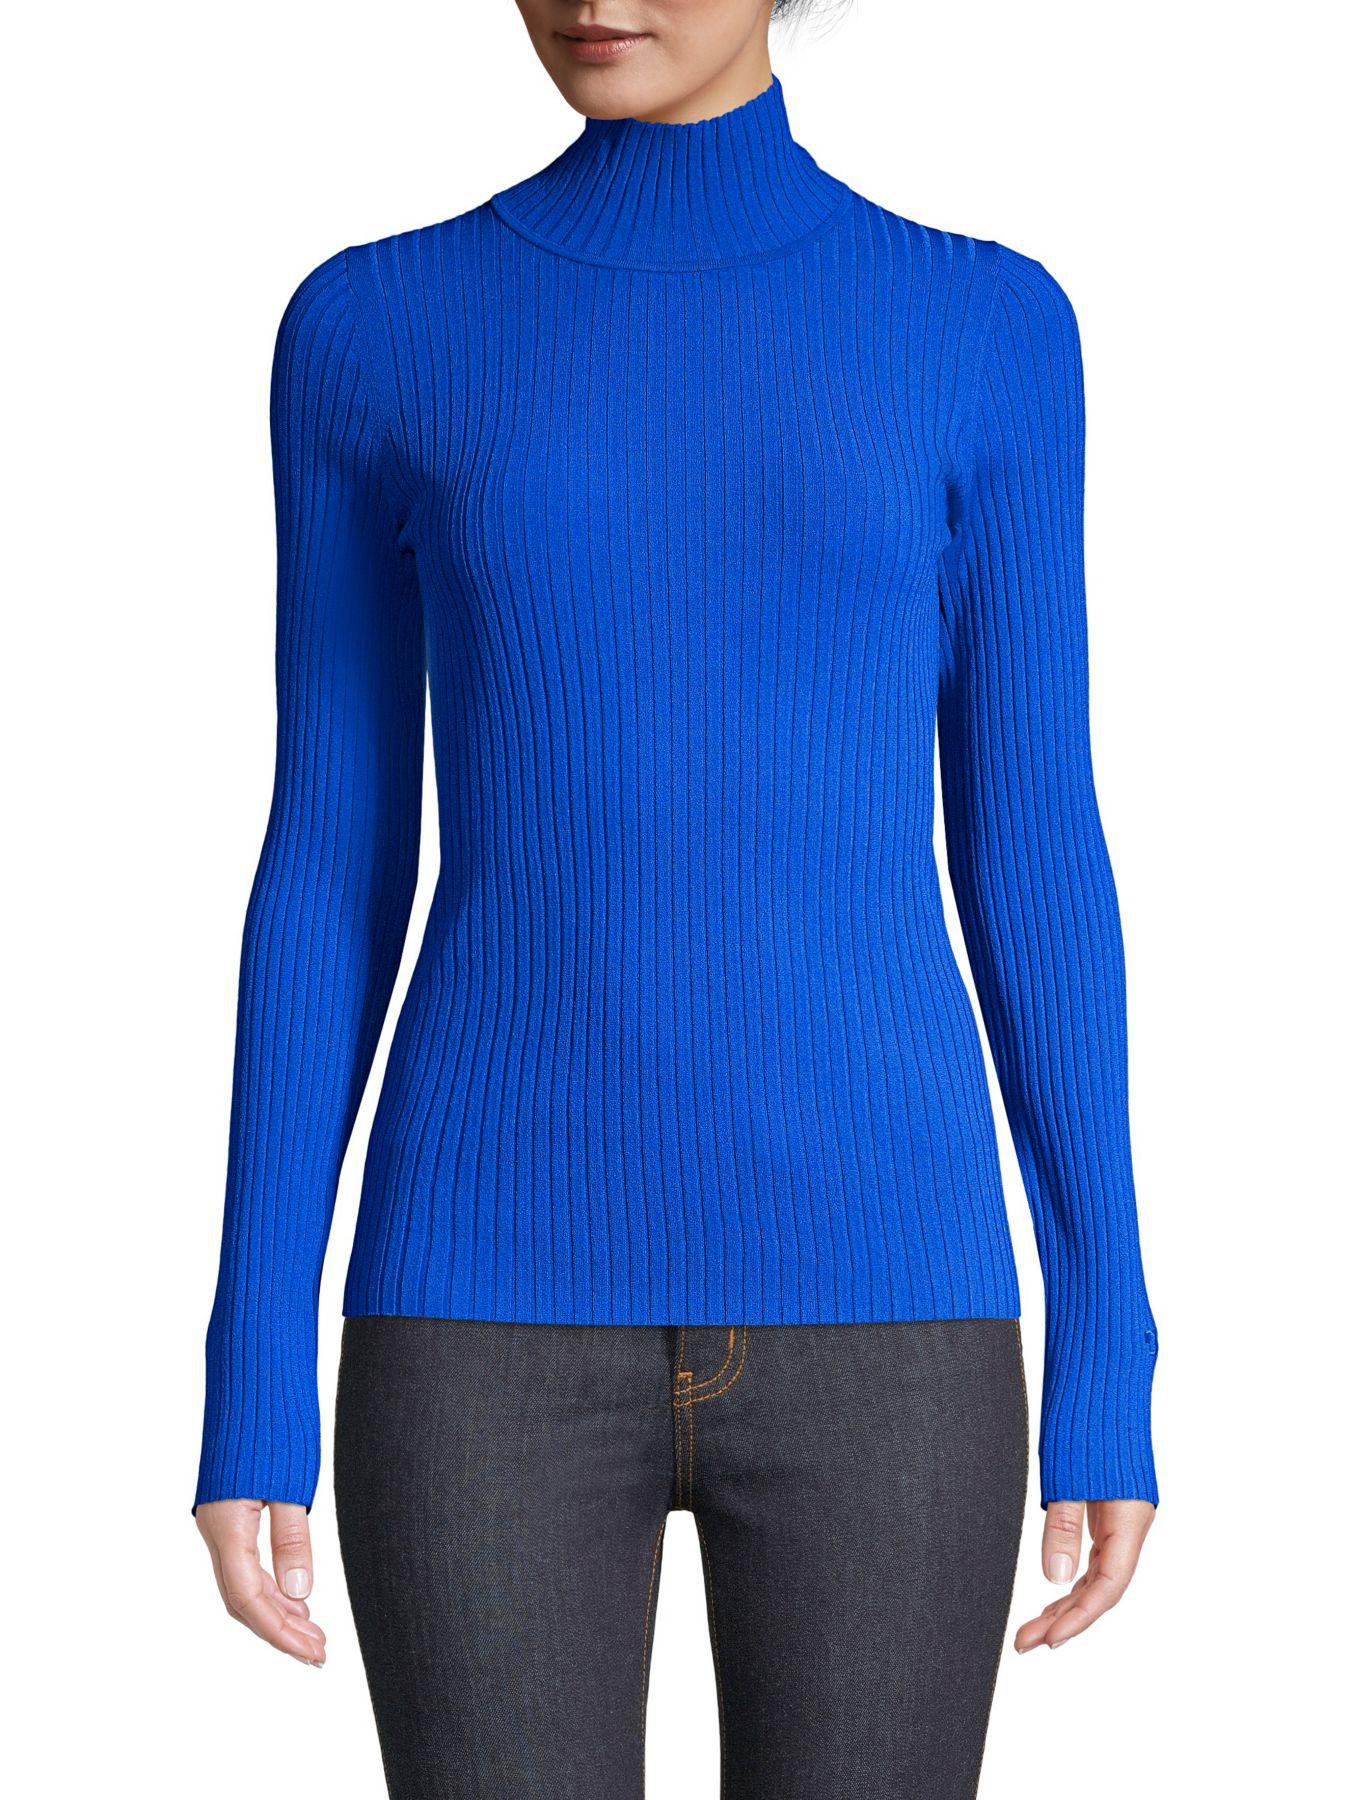 Tory Burch Synthetic Rib-knit Turtleneck Sweater in Blue - Lyst